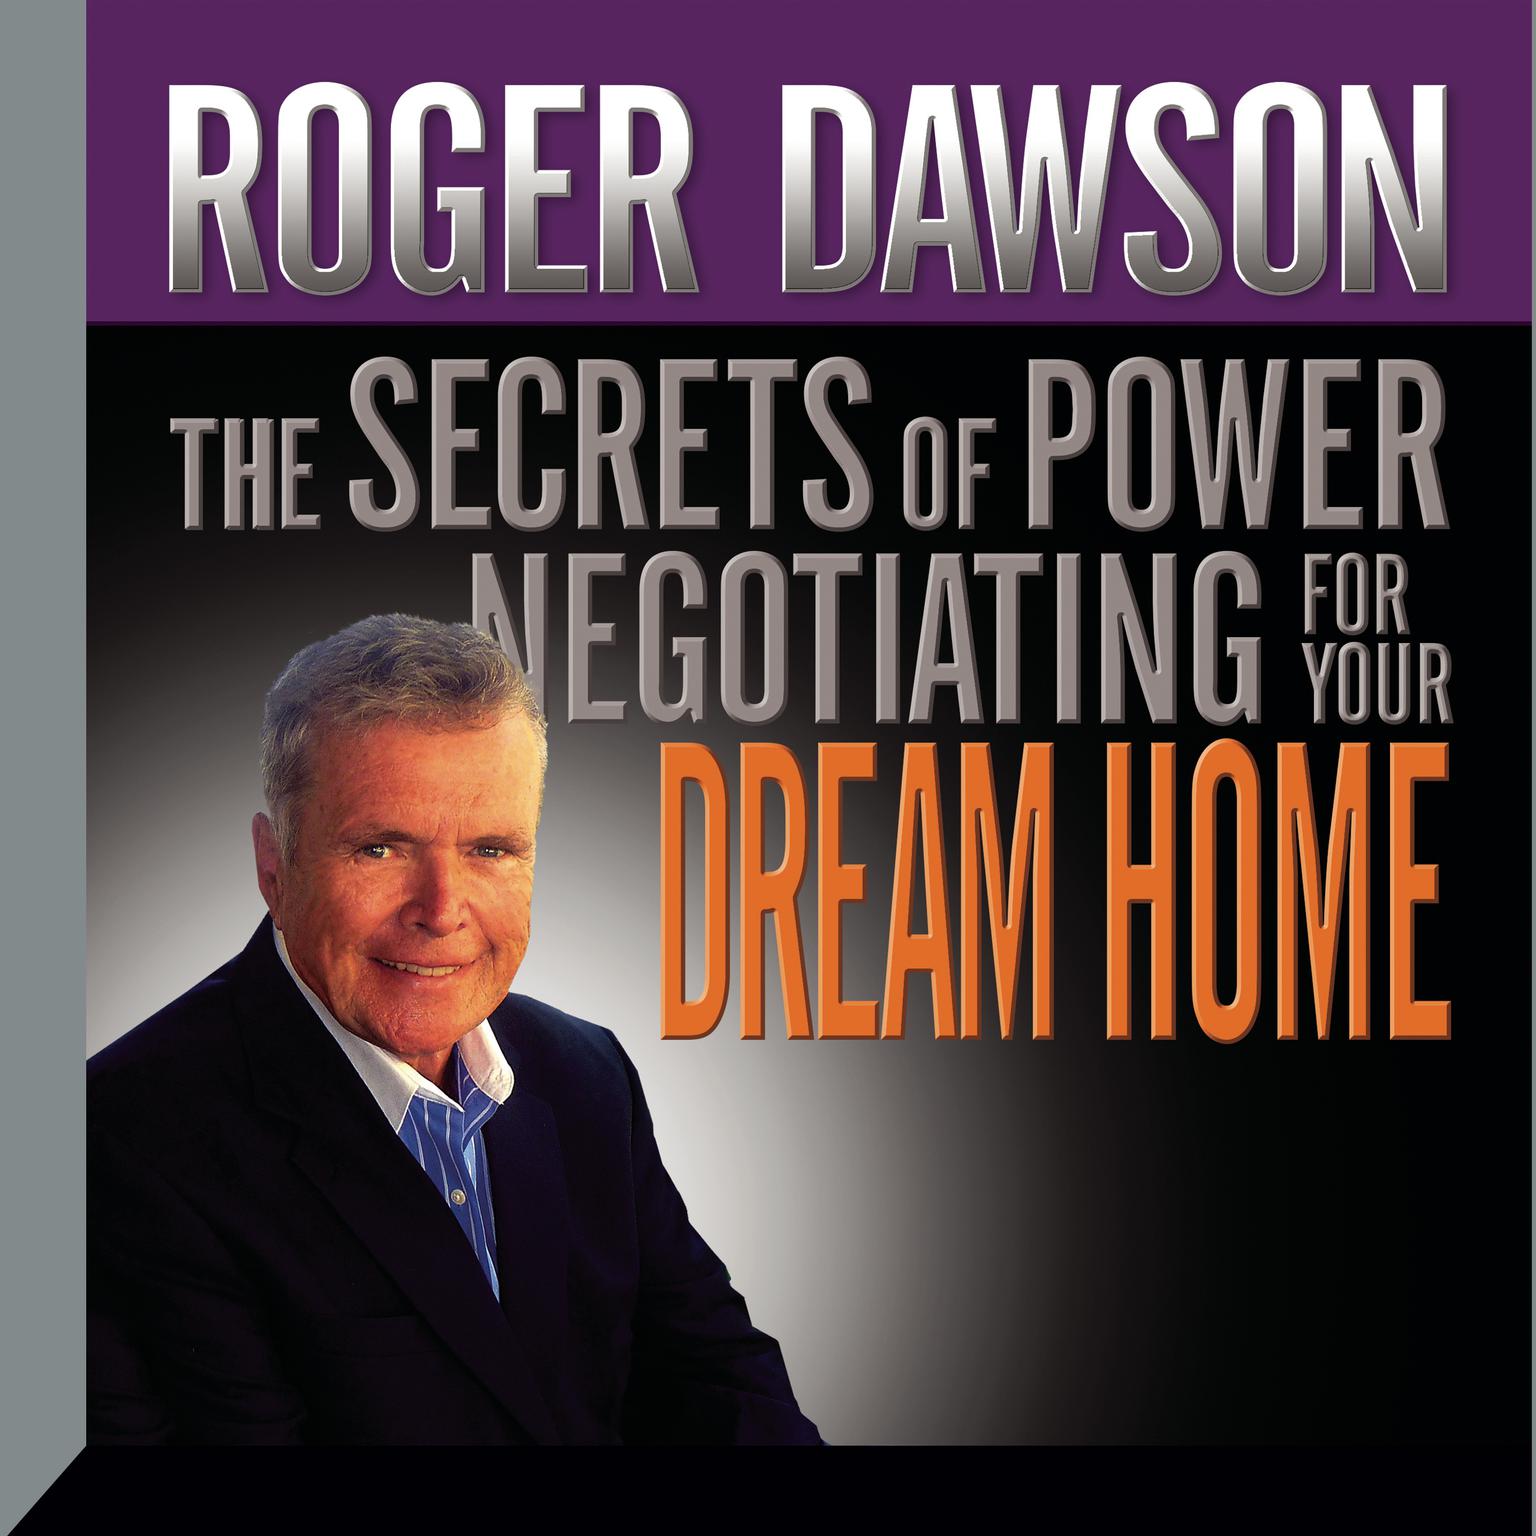 The Secrets of Power Negotiating for Your Dream Home Audiobook, by Roger Dawson